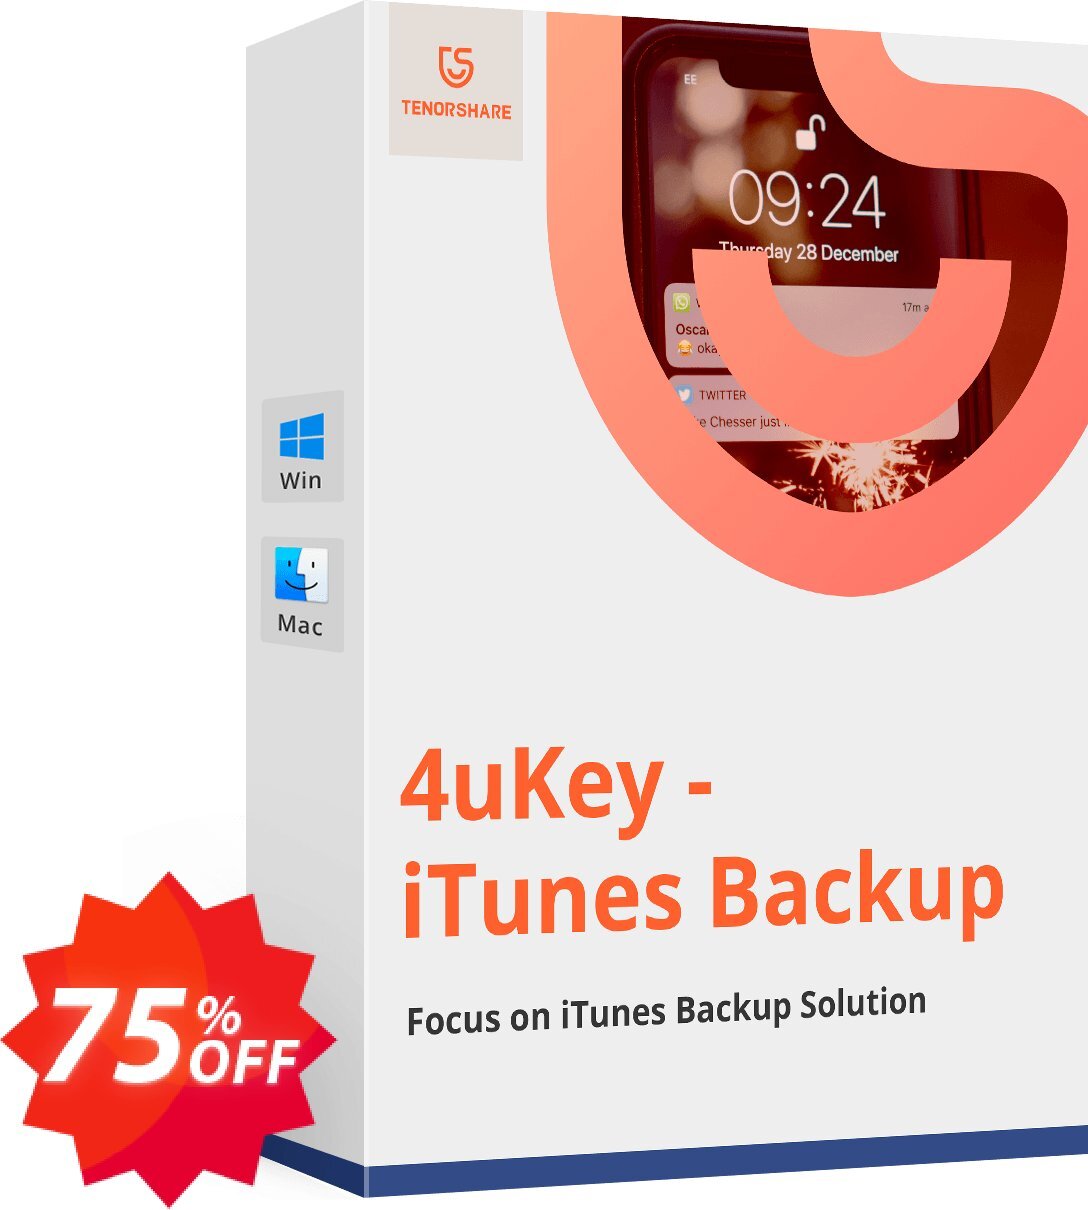 TTenorshare 4uKey iTunes Backup for MAC, Lifetime Plan  Coupon code 75% discount 